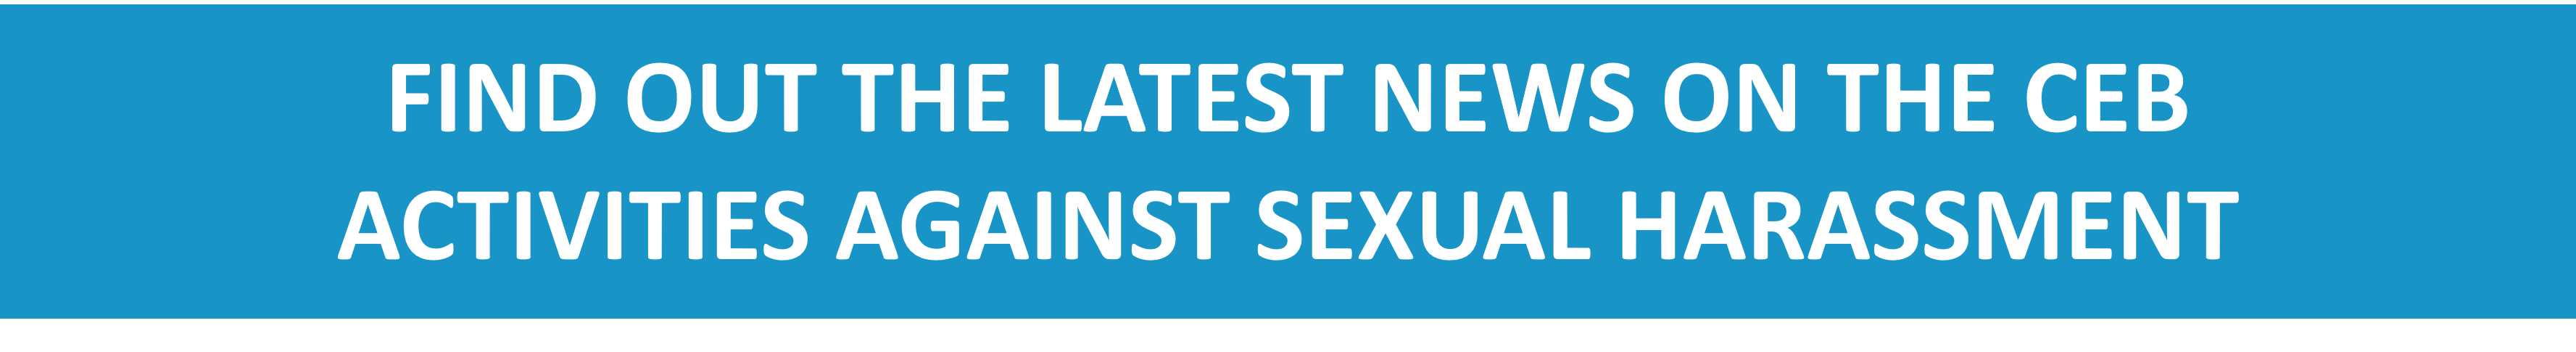 FIND OUT THE LATEST NEWS ON THE CEB ACTIVITIES AGAINST SEXUAL HARASSMENT